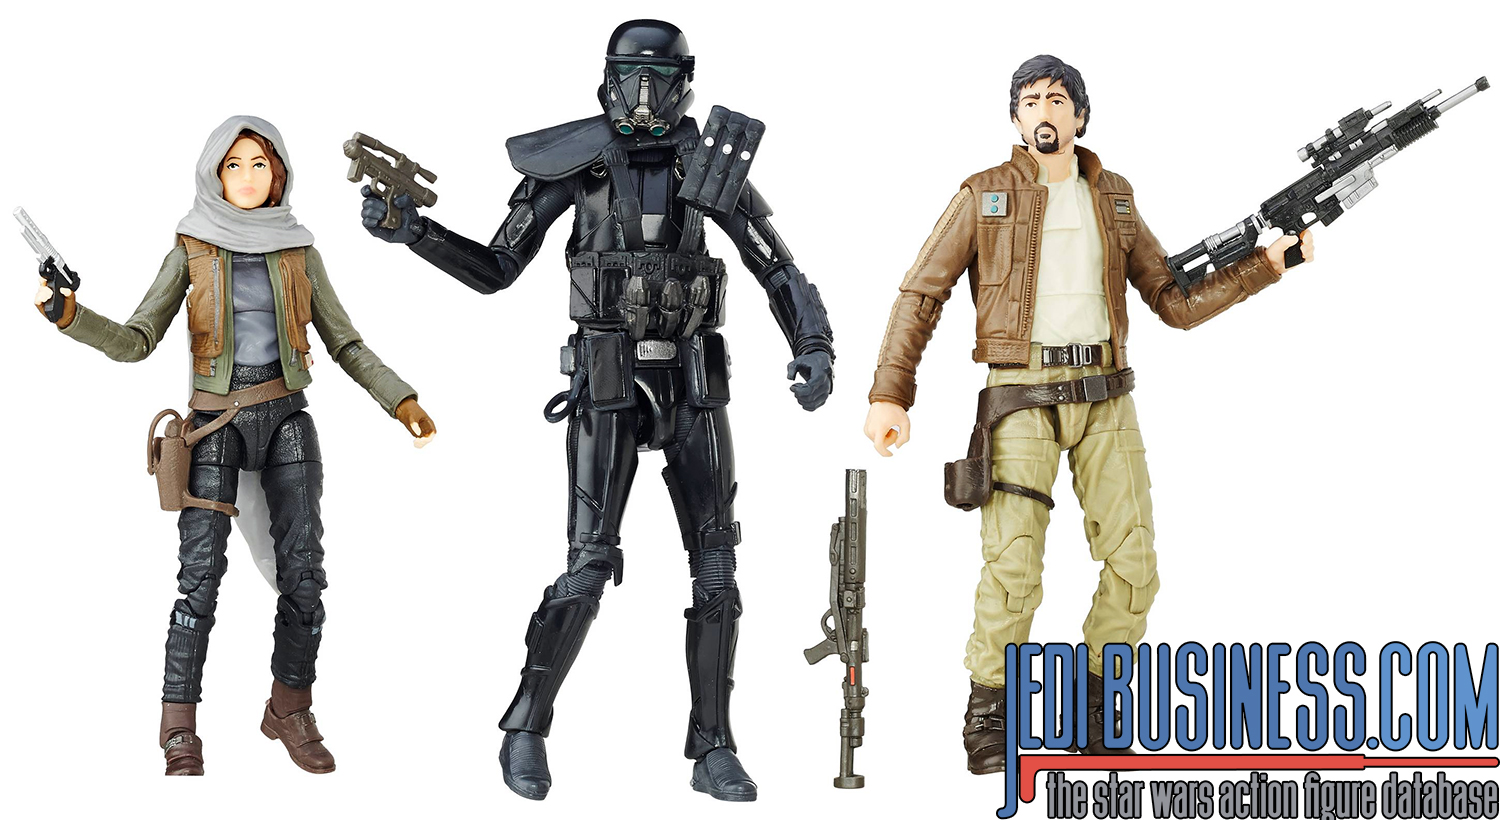 Death Trooper Rogue One 3-Pack